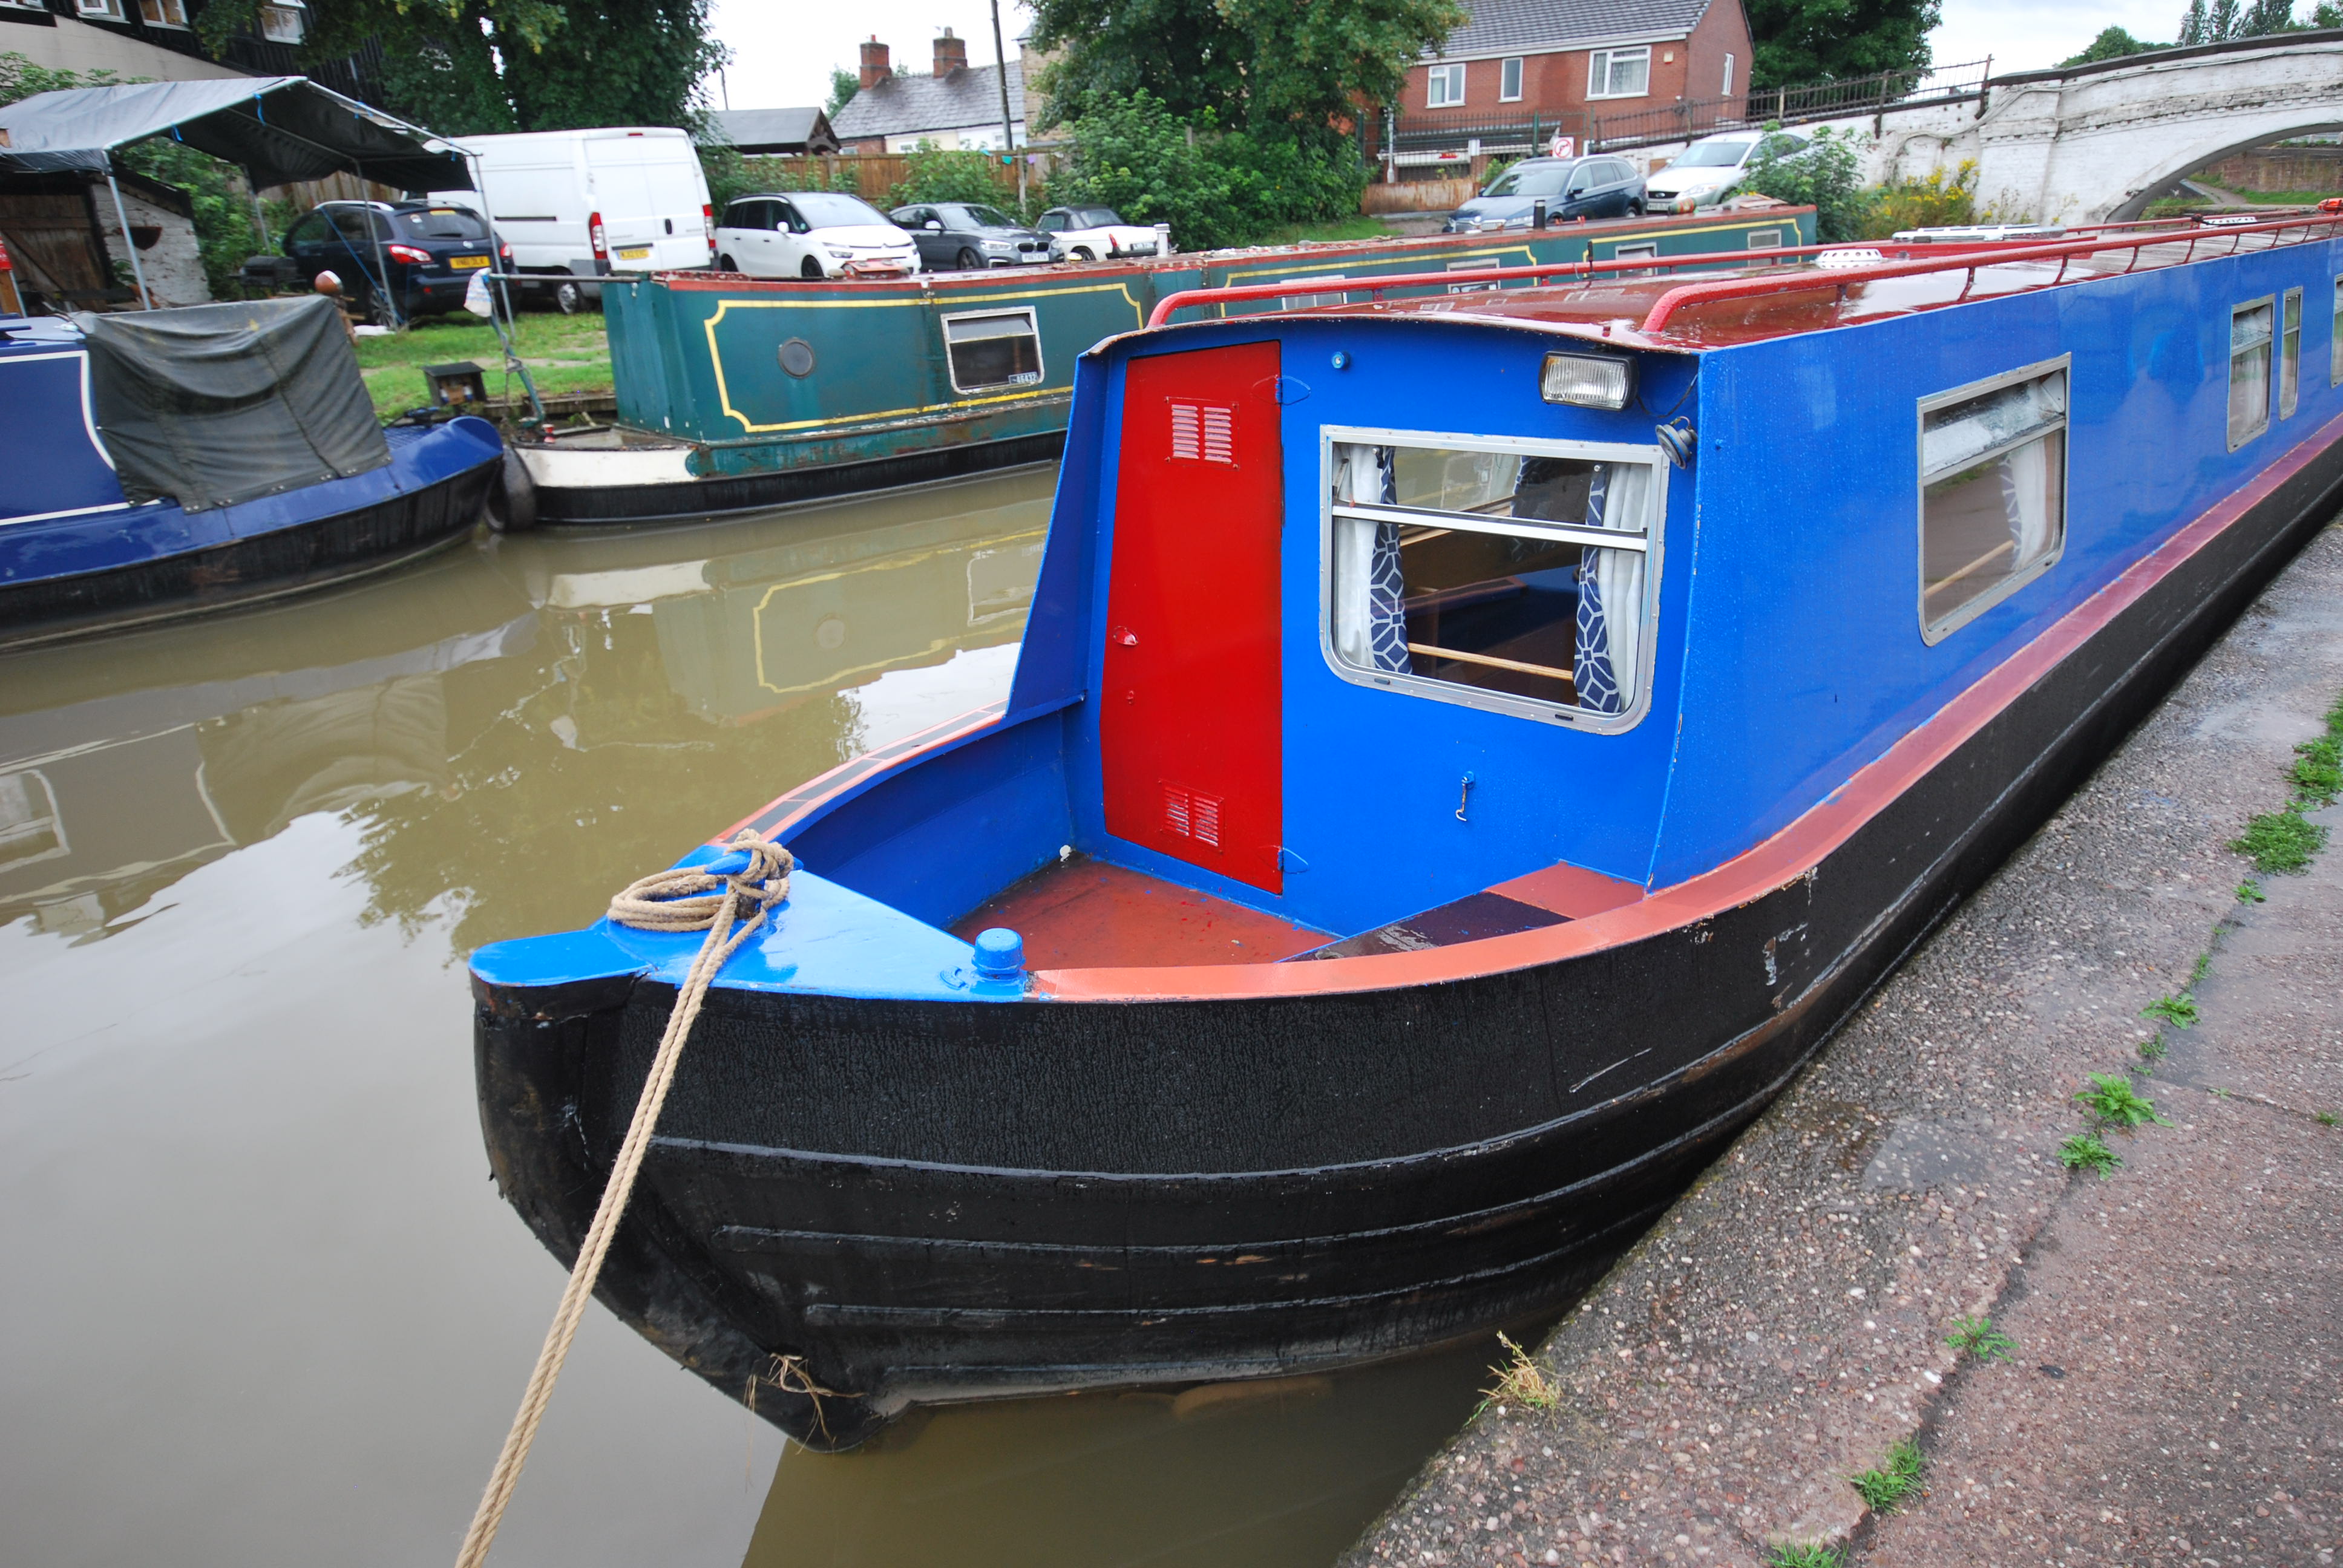 The Osprey class canal boat